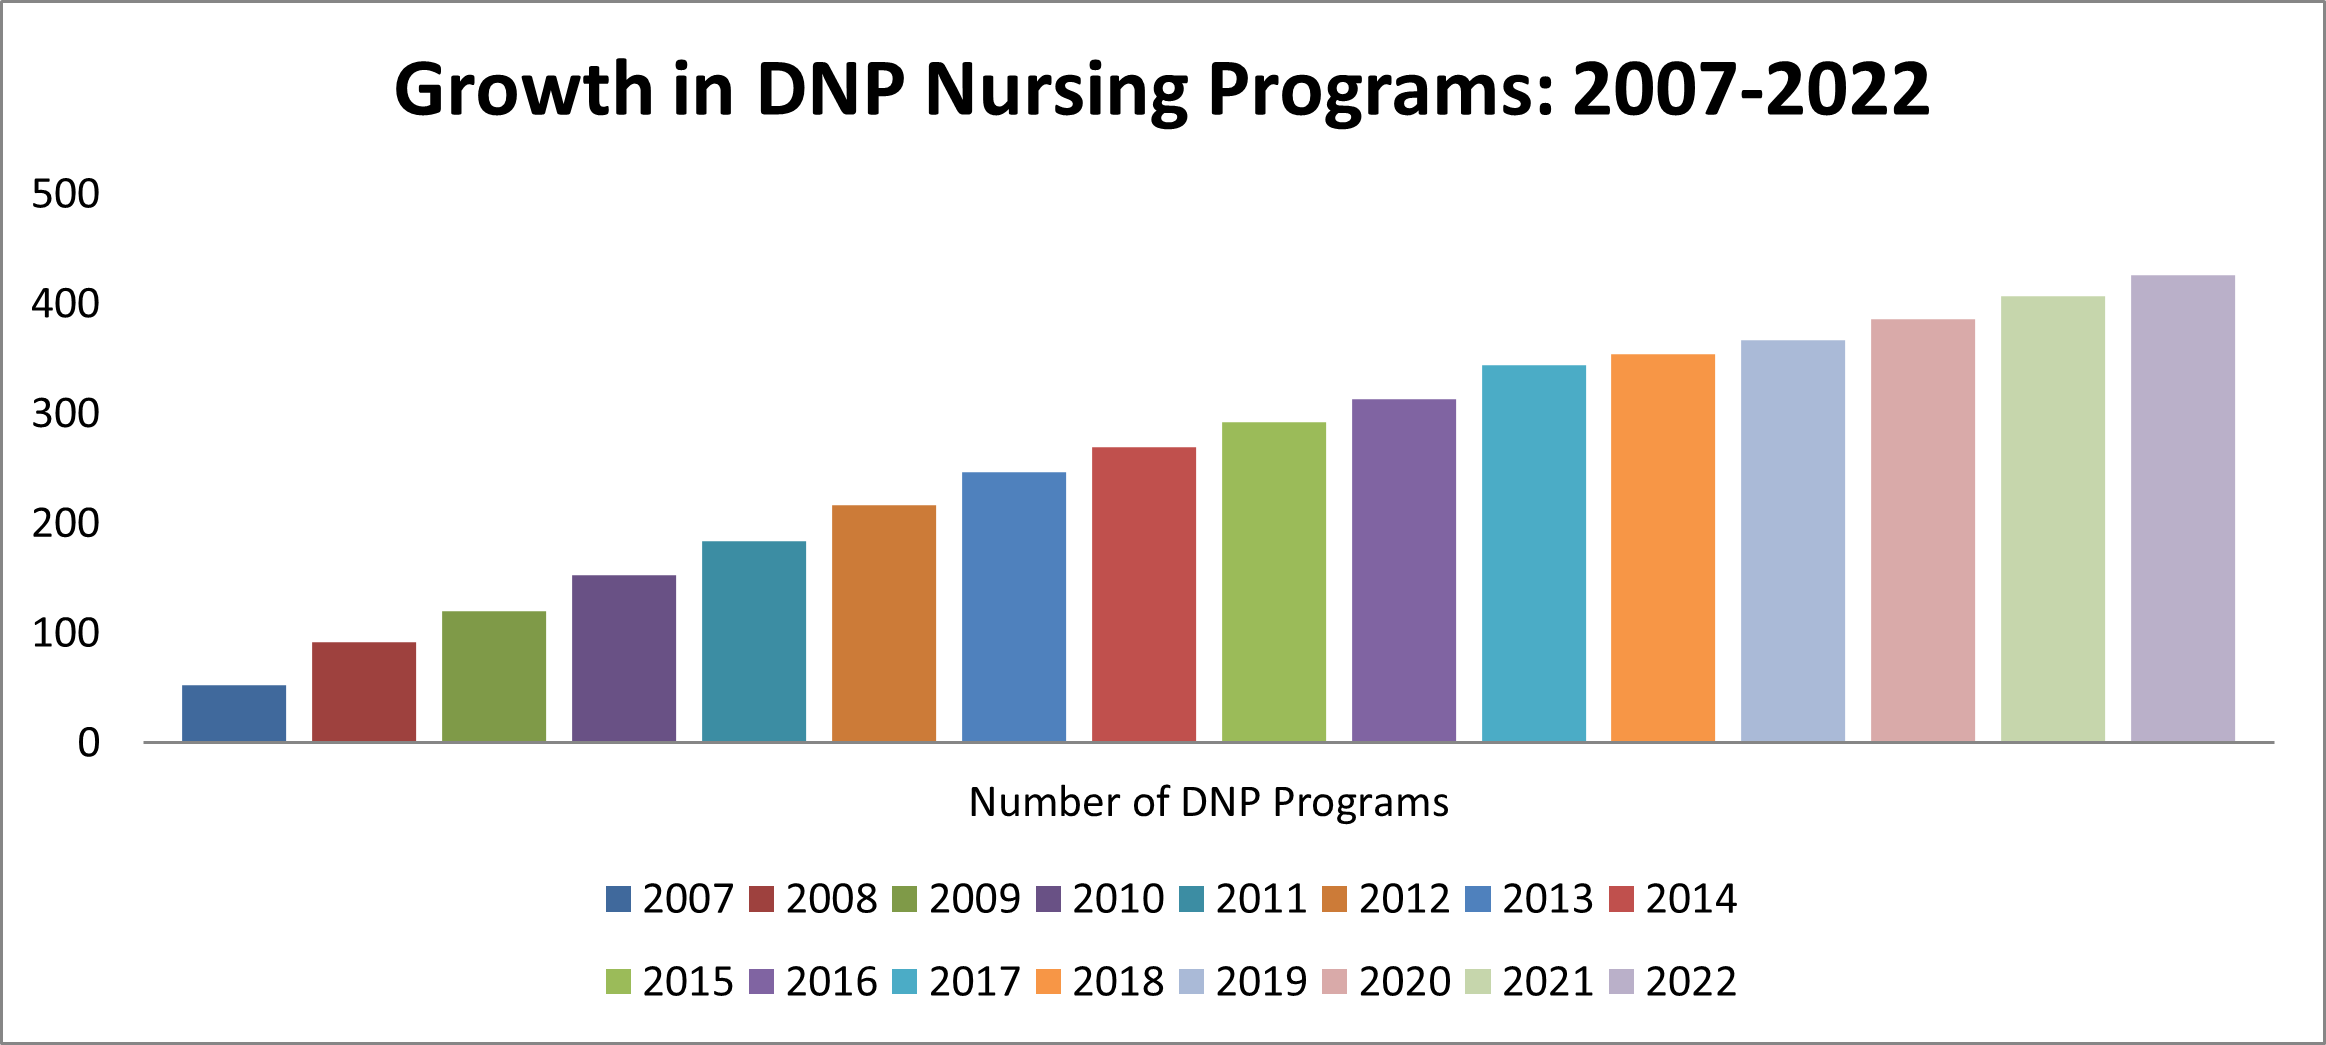 Bar chart showing steady growth in DNP programs from about 50 in 2007 to about 425 in 2021